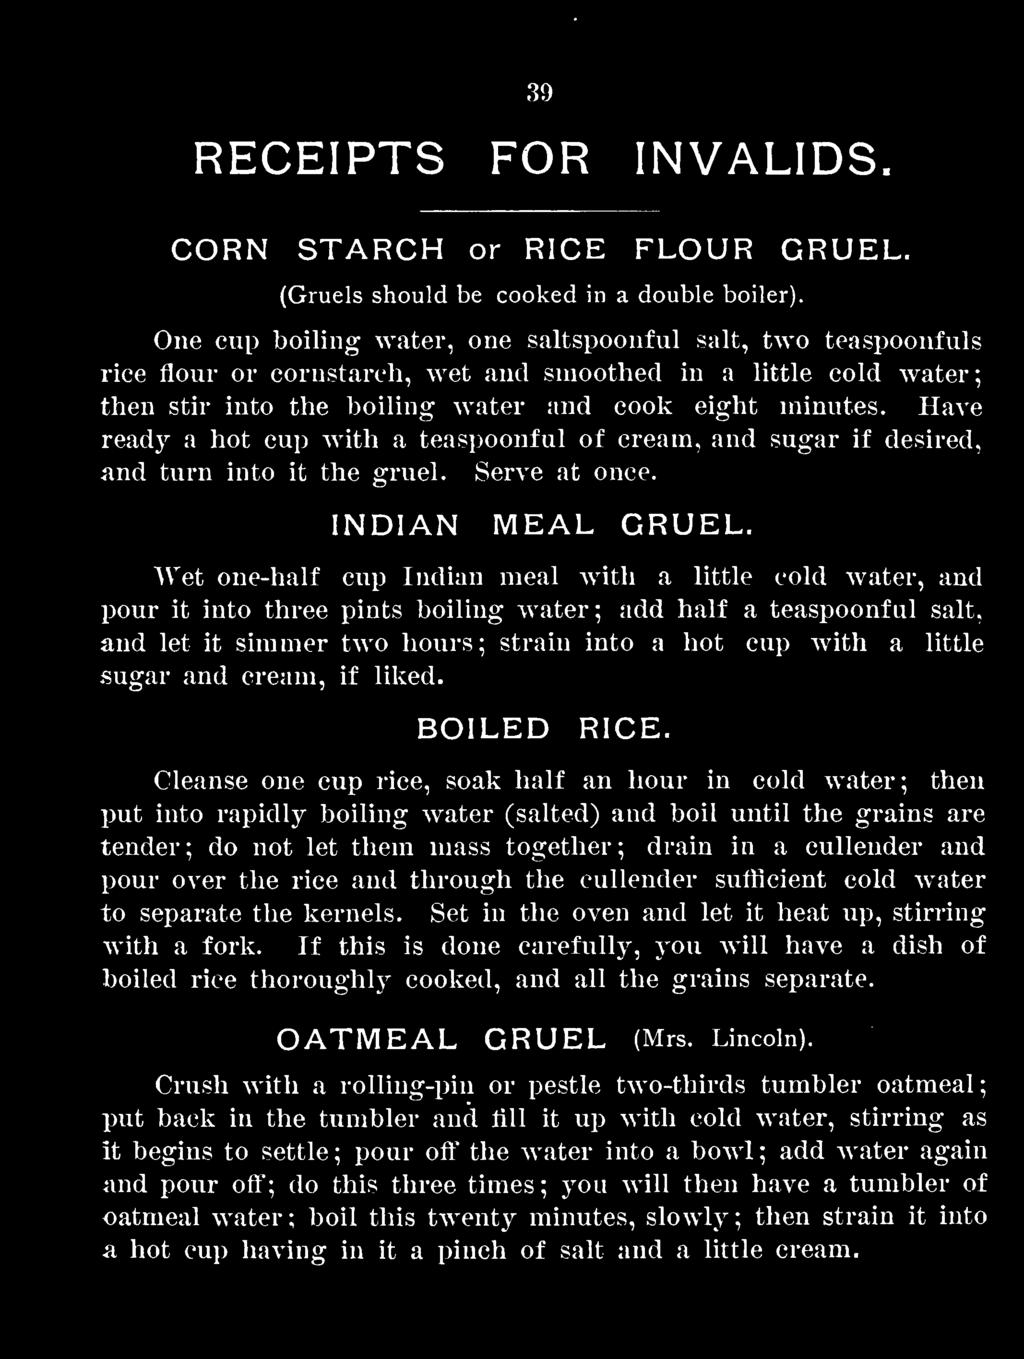 Have ready a hot cup with a teaspoonful of cream, and sugar if desired, and turn into it the gruel. Serve at once. INDIAN MEAL GRUEL.